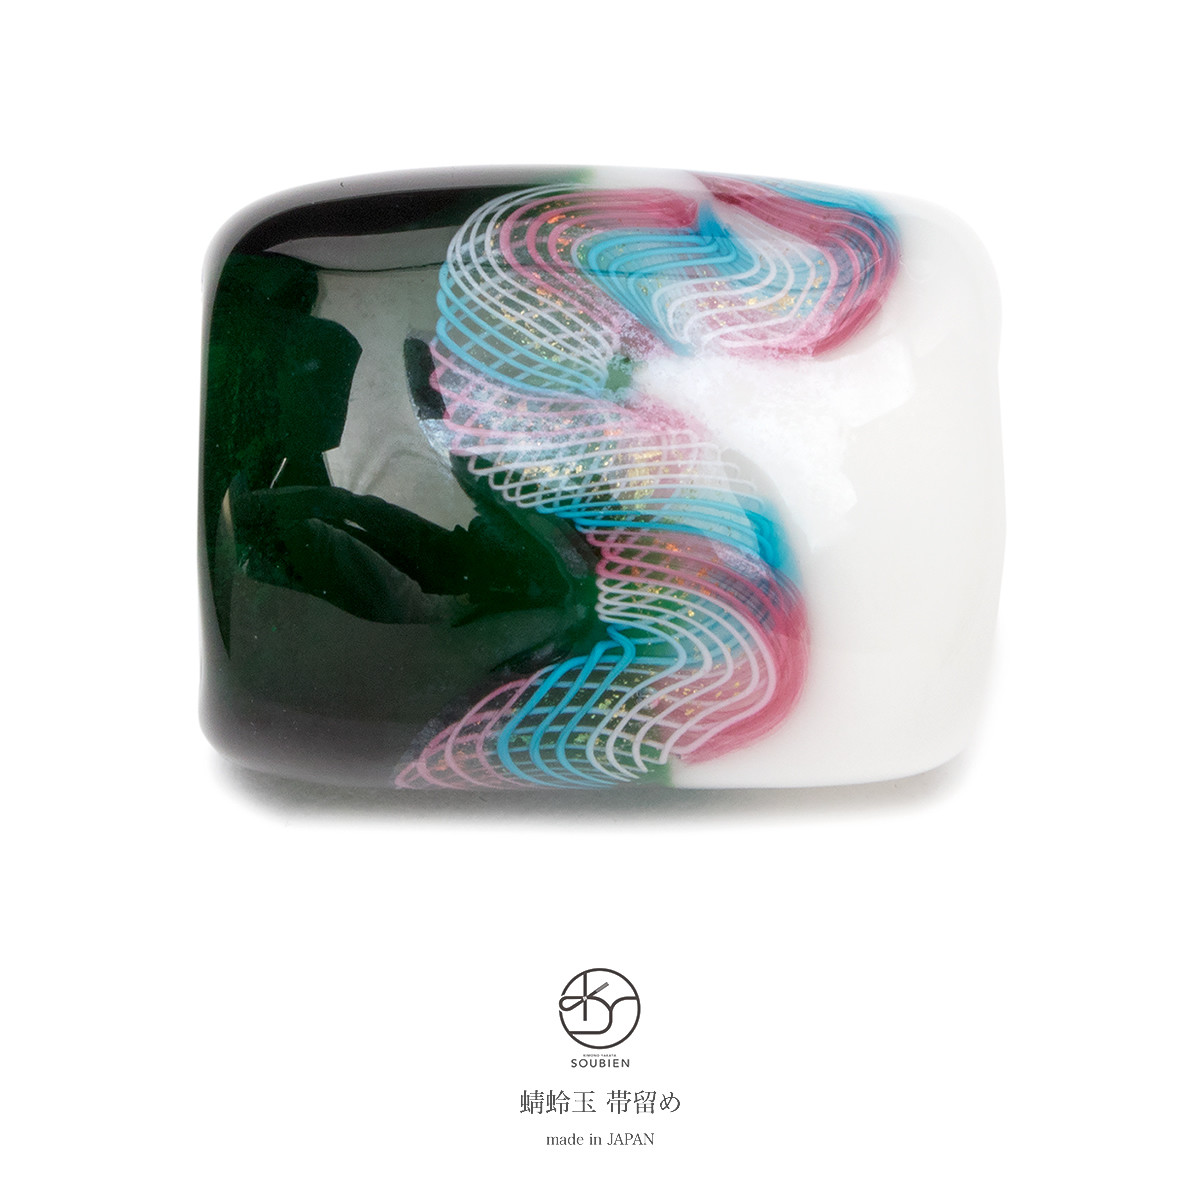 16 Cute Fine China Vase Made In Japan 2024 free download fine china vase made in japan of soubien product made in obi buckle brand the hills are robed in for product made in obi buckle brand the hills are robed in green studio white white myrtle